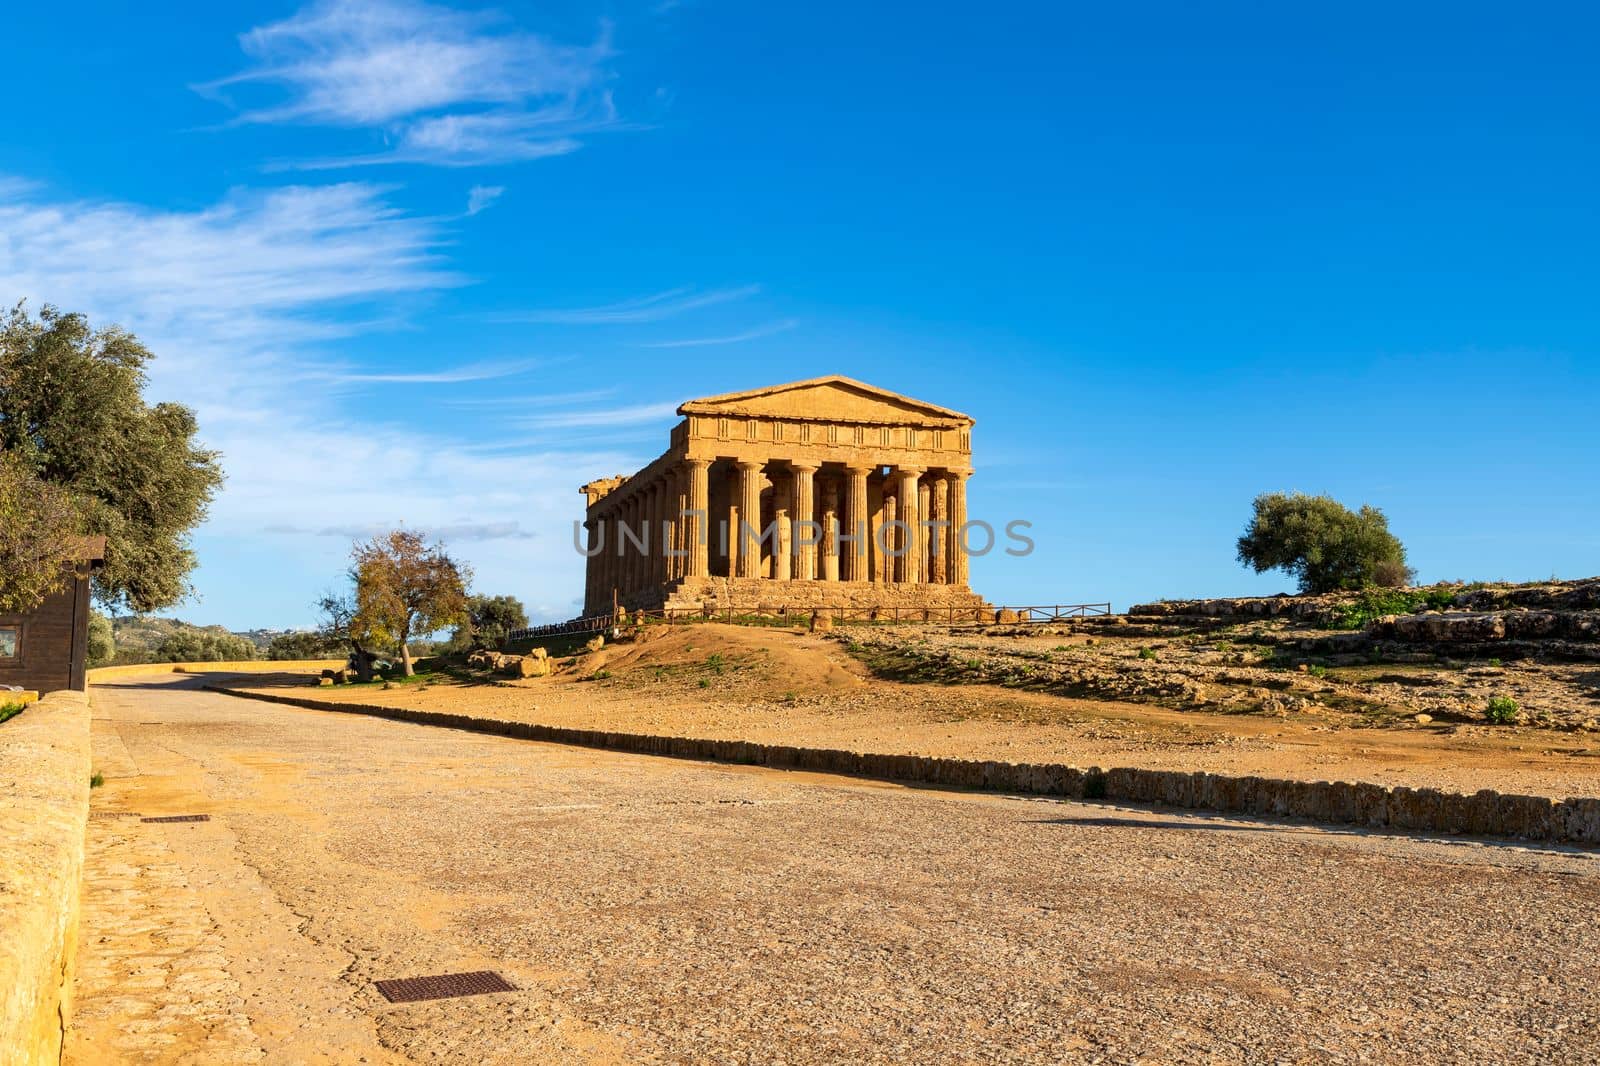 The famous Temple of Concordia in the Valley of Temples near Agrigento, Sicily, Italy by EdVal